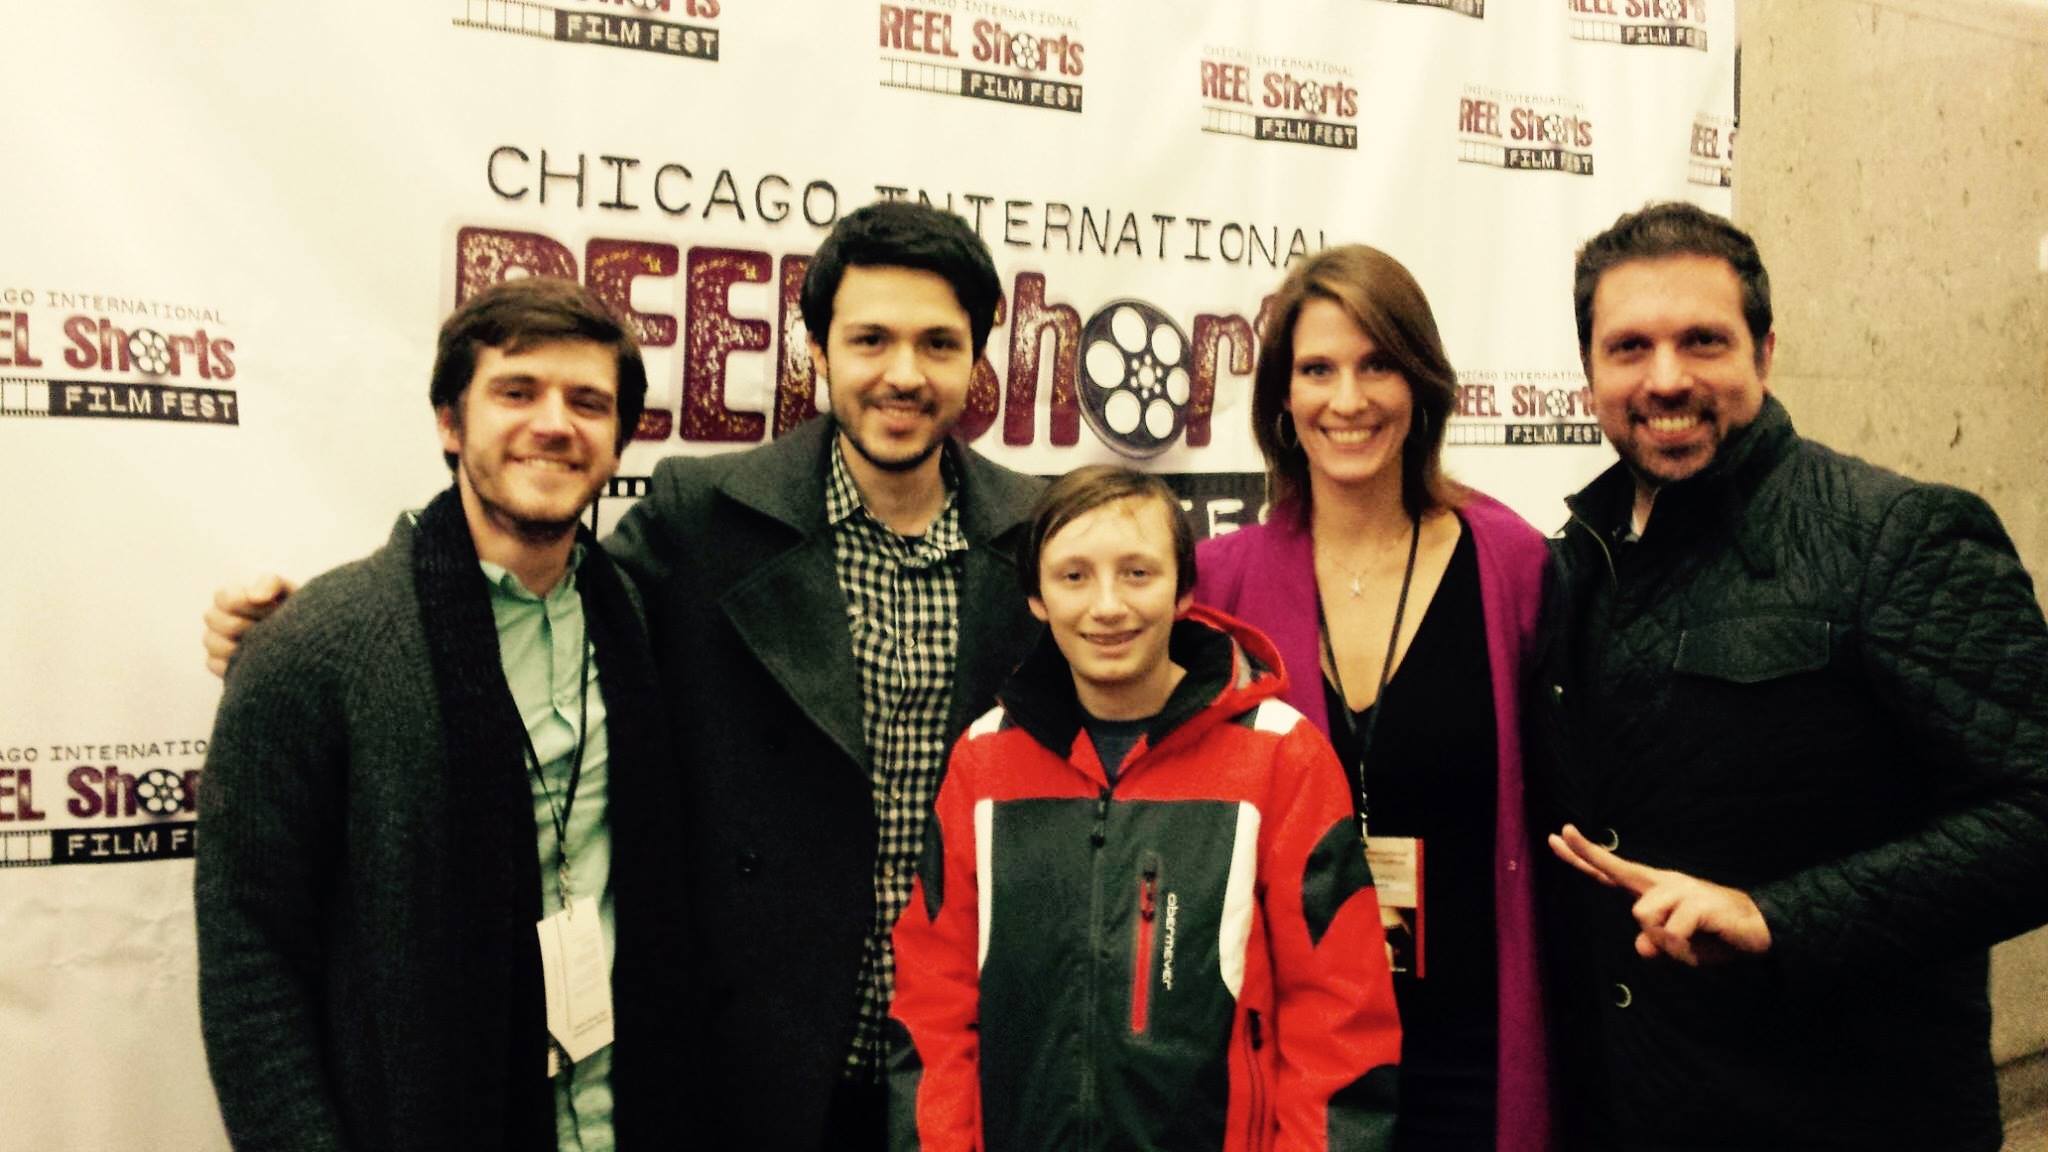 Family Meal Cast/Crew at the Chicago International REEL Short Film Festival where we won the Audience Choice Award!